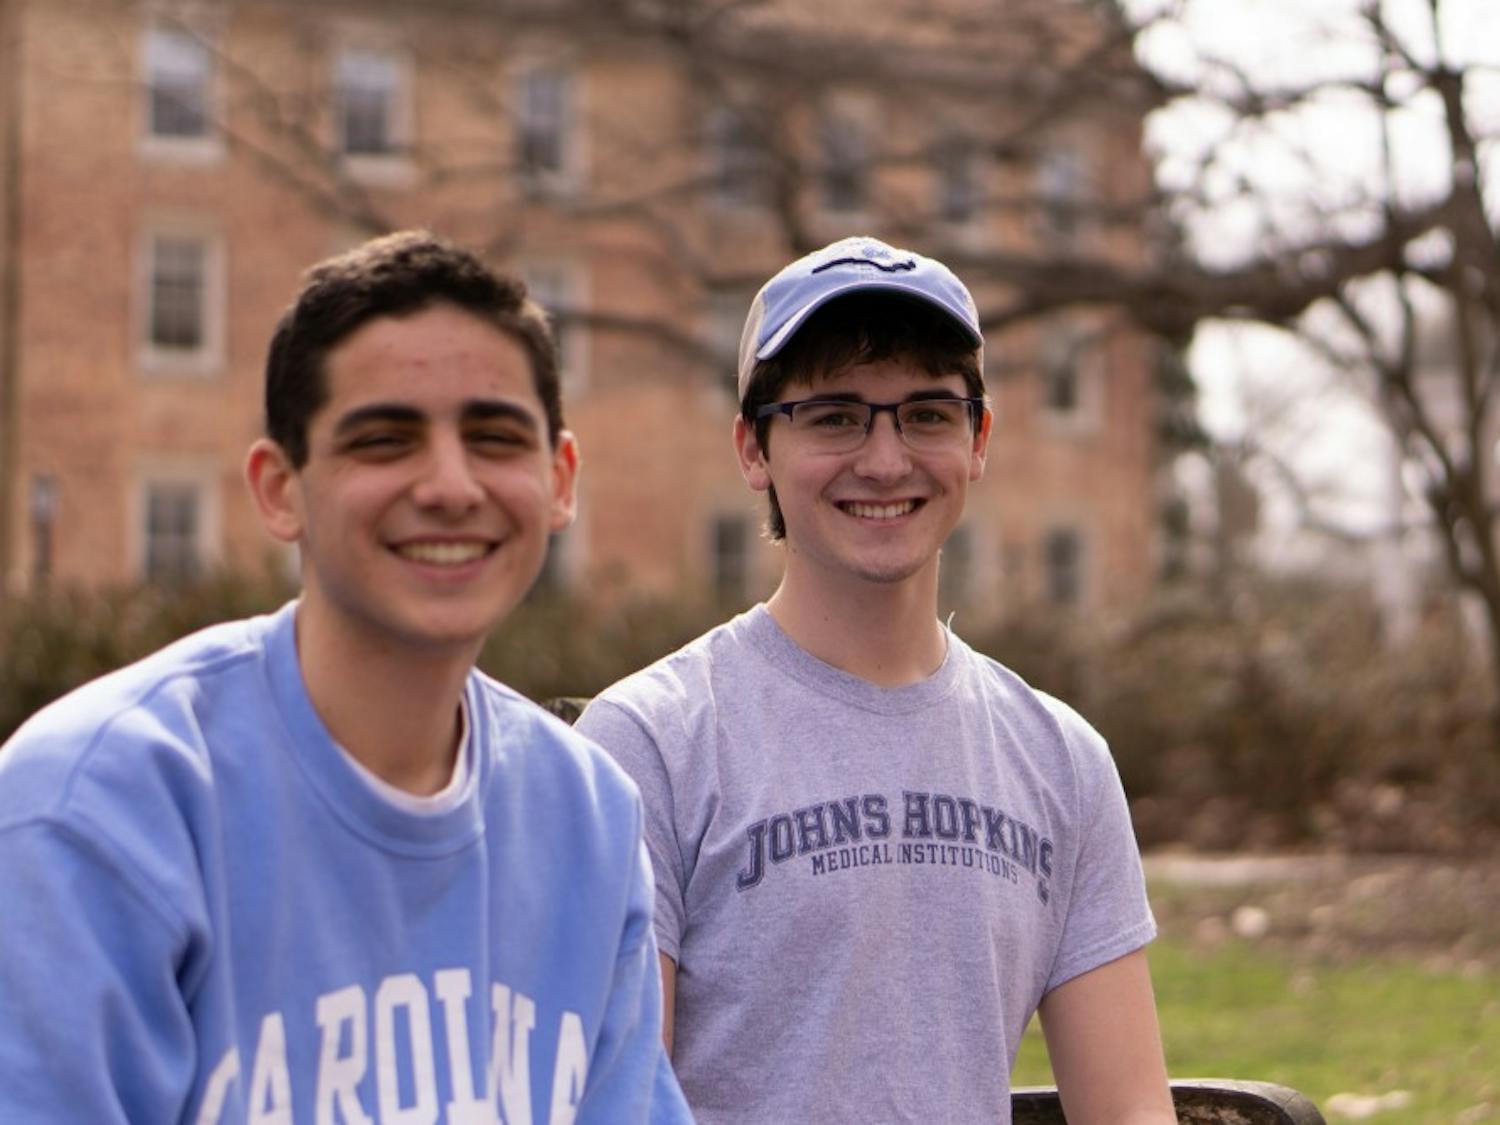 Sam Zahn(Left) and Brady Hanshaw(Right) are Roberston Scholars attending UNC-Chapel Hill this semster. Roberston Scholars are required to attend both schools during their college career at UNC-Chapel Hill and Duke.  Zahn choose Chapel Hill as his home institution over Duke for its Southern Charm.